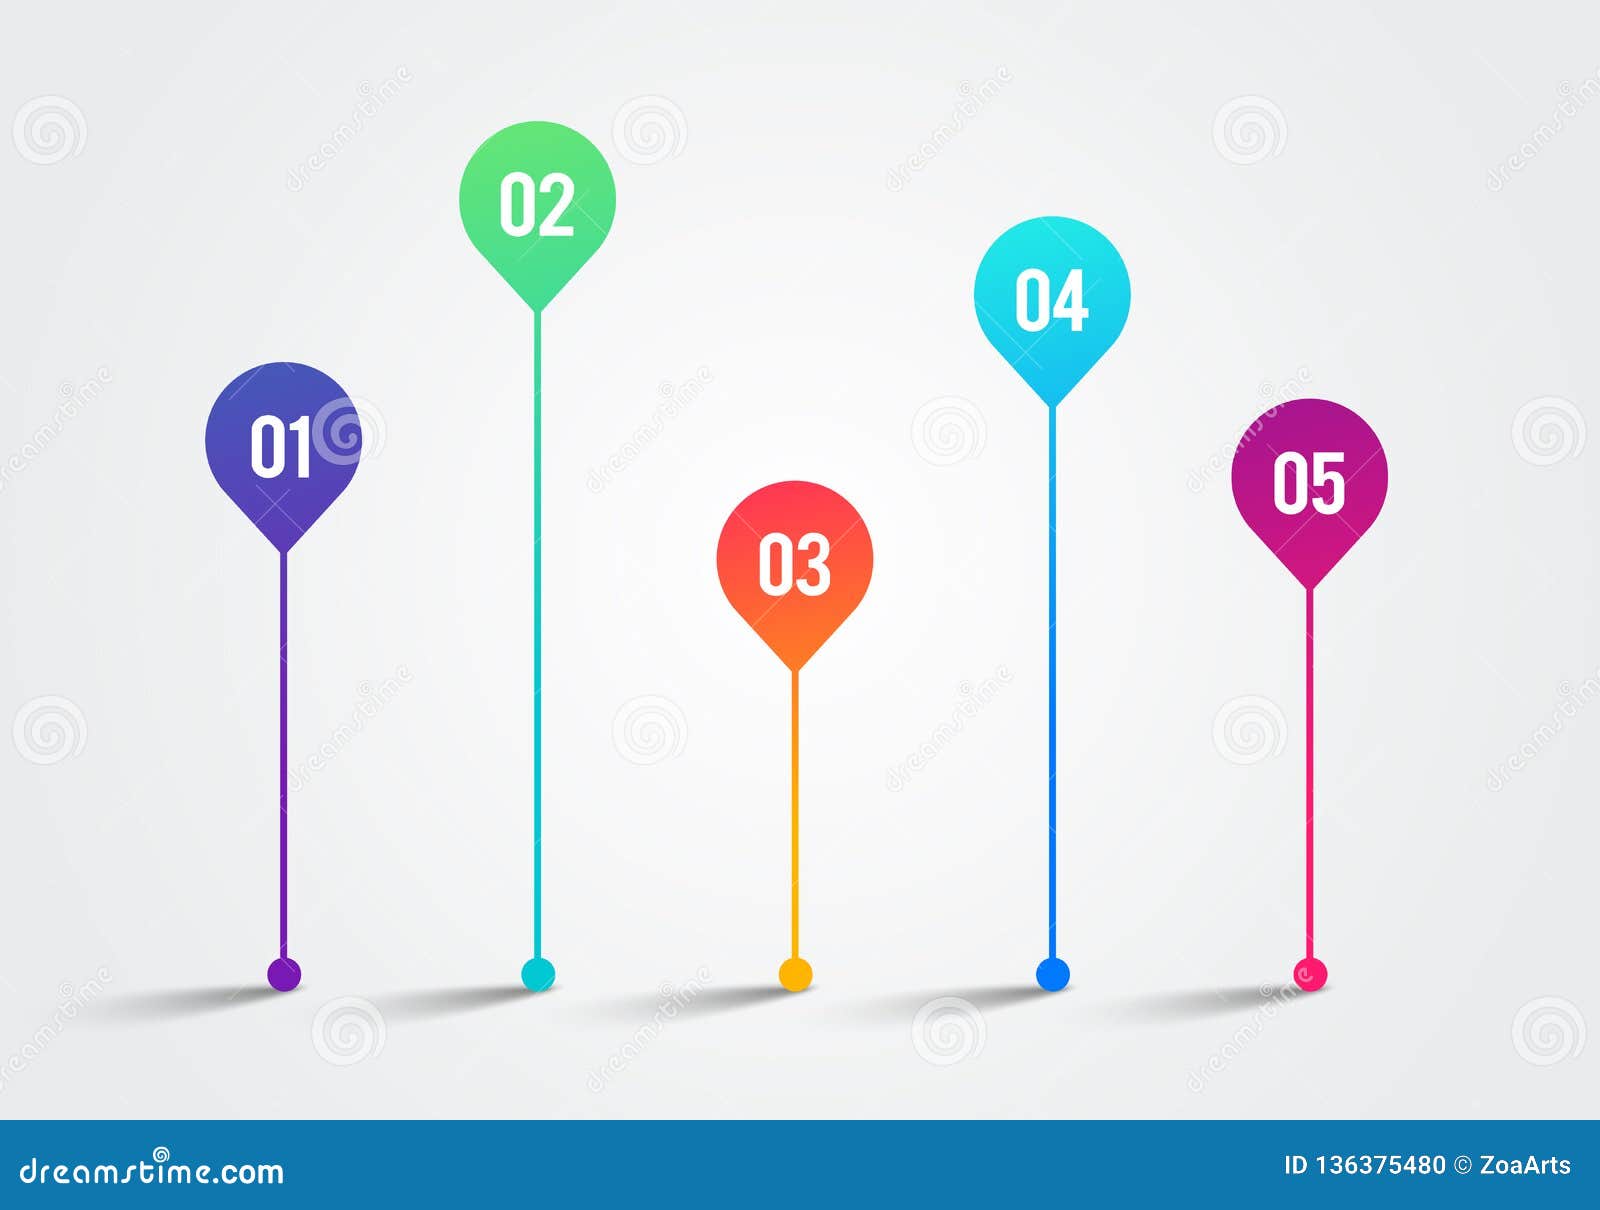  illlustration timeline 3d infographic 1 to 5  template. charts, diagrams and other  s for data and